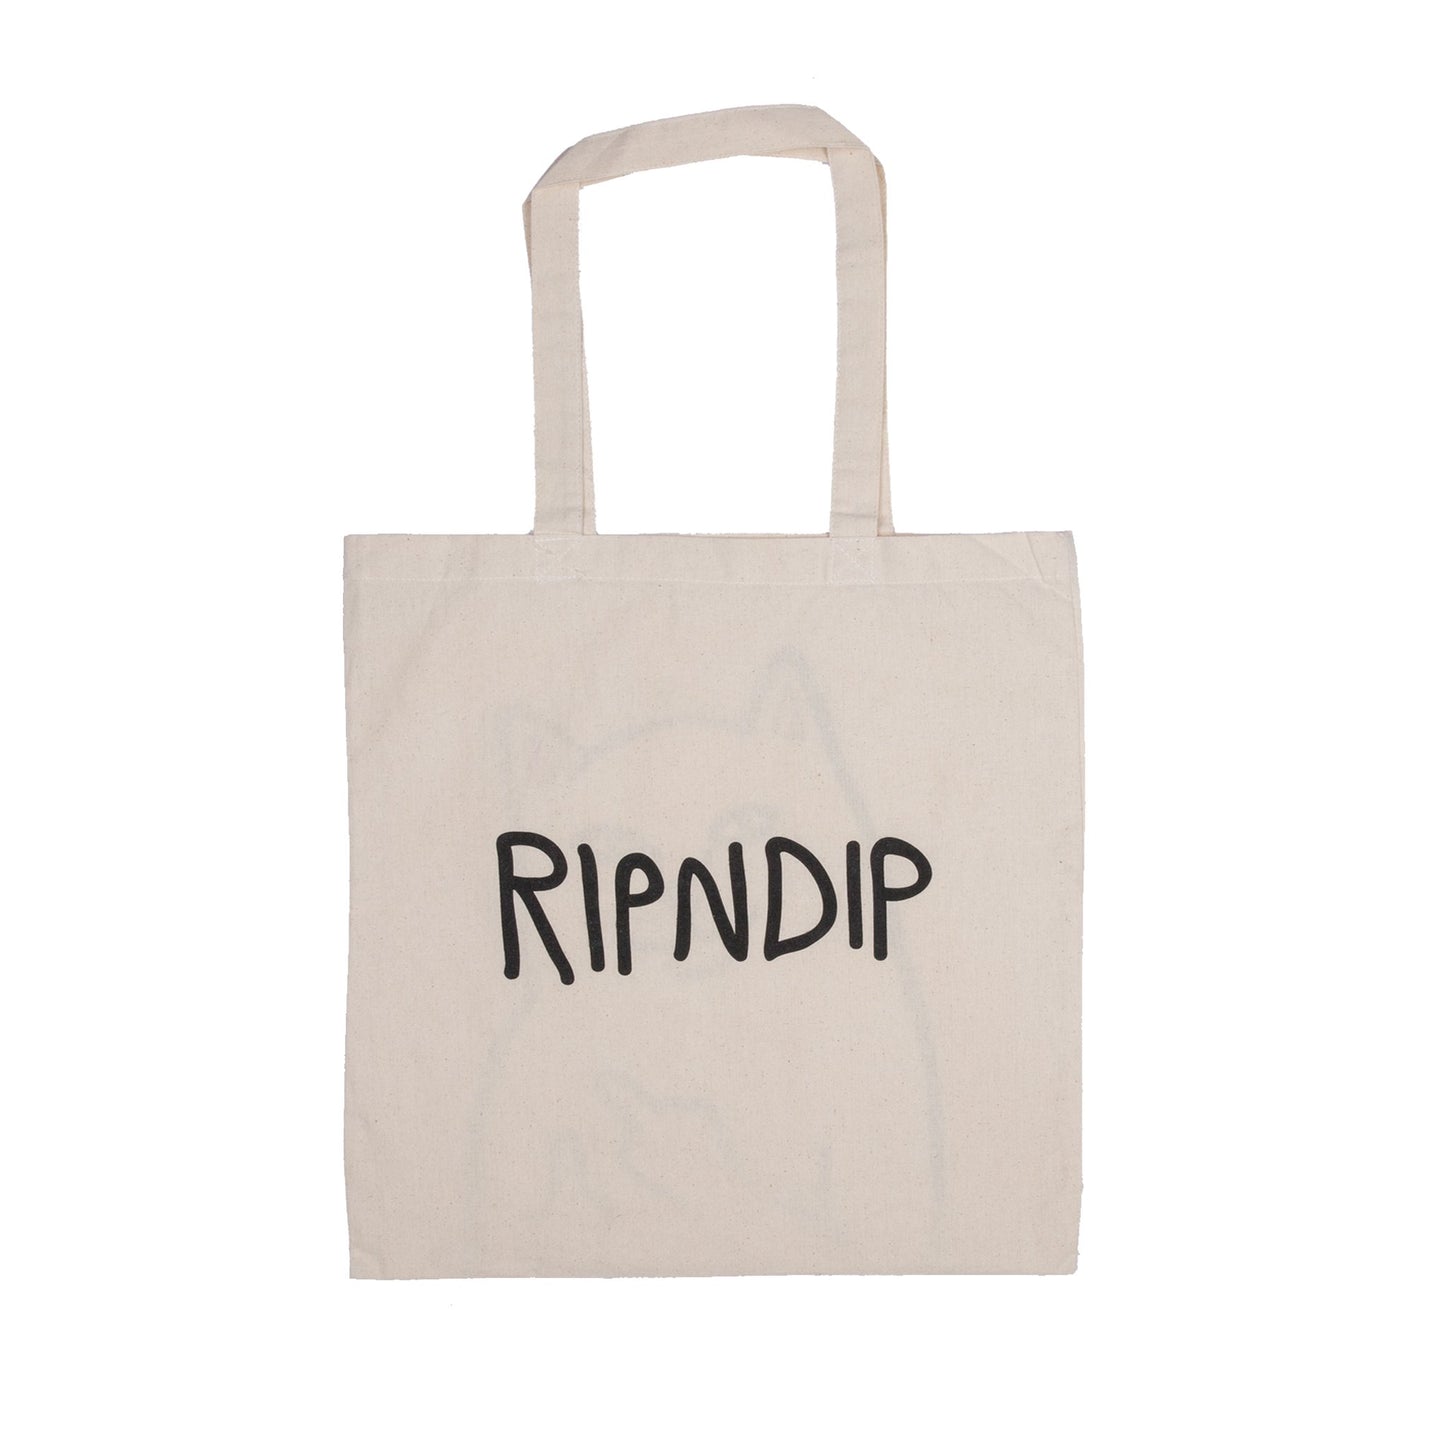 RIPNDIP - OG Lord Nermal Tote Bag, Natural Canvas - The Giant Peach